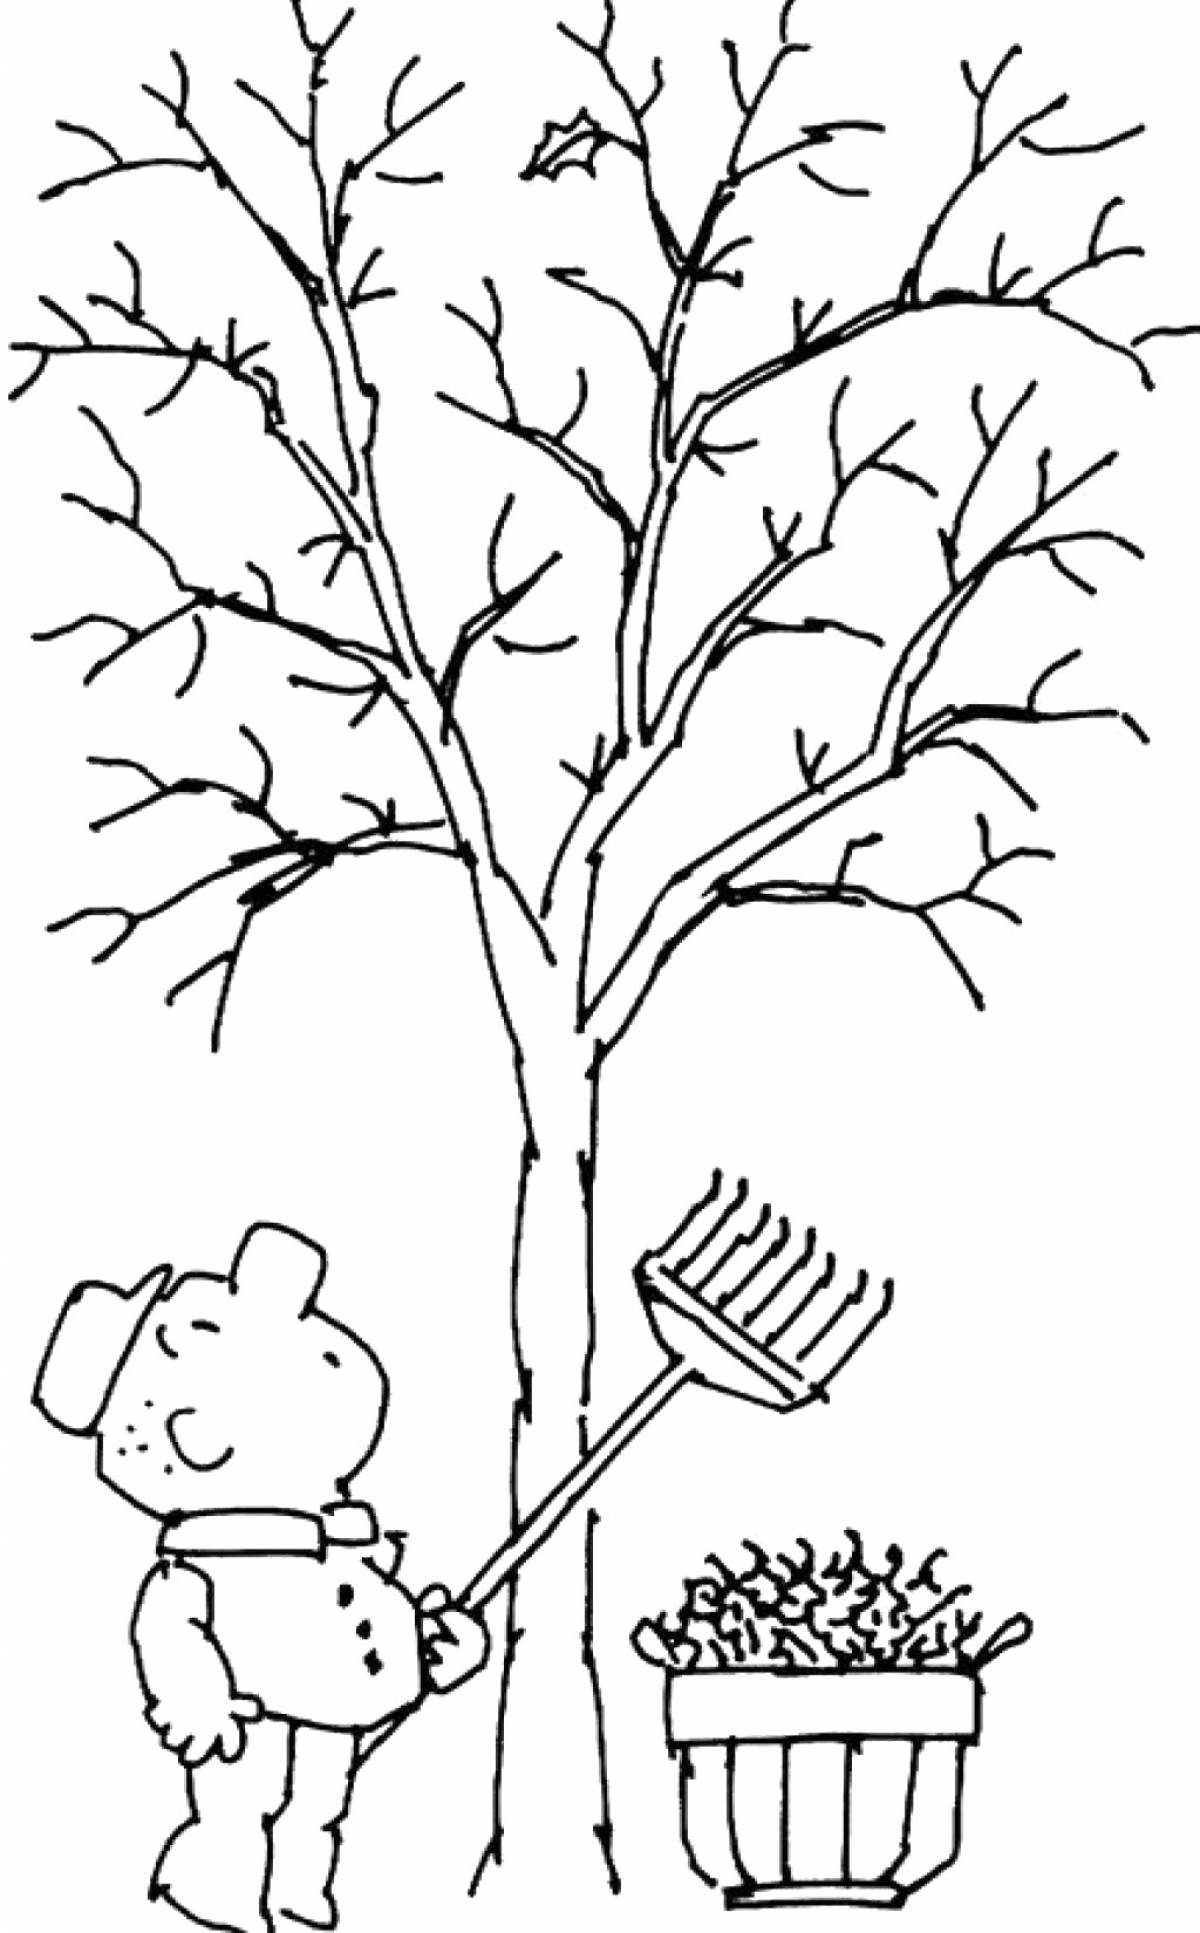 Coloring book for children tree without leaves